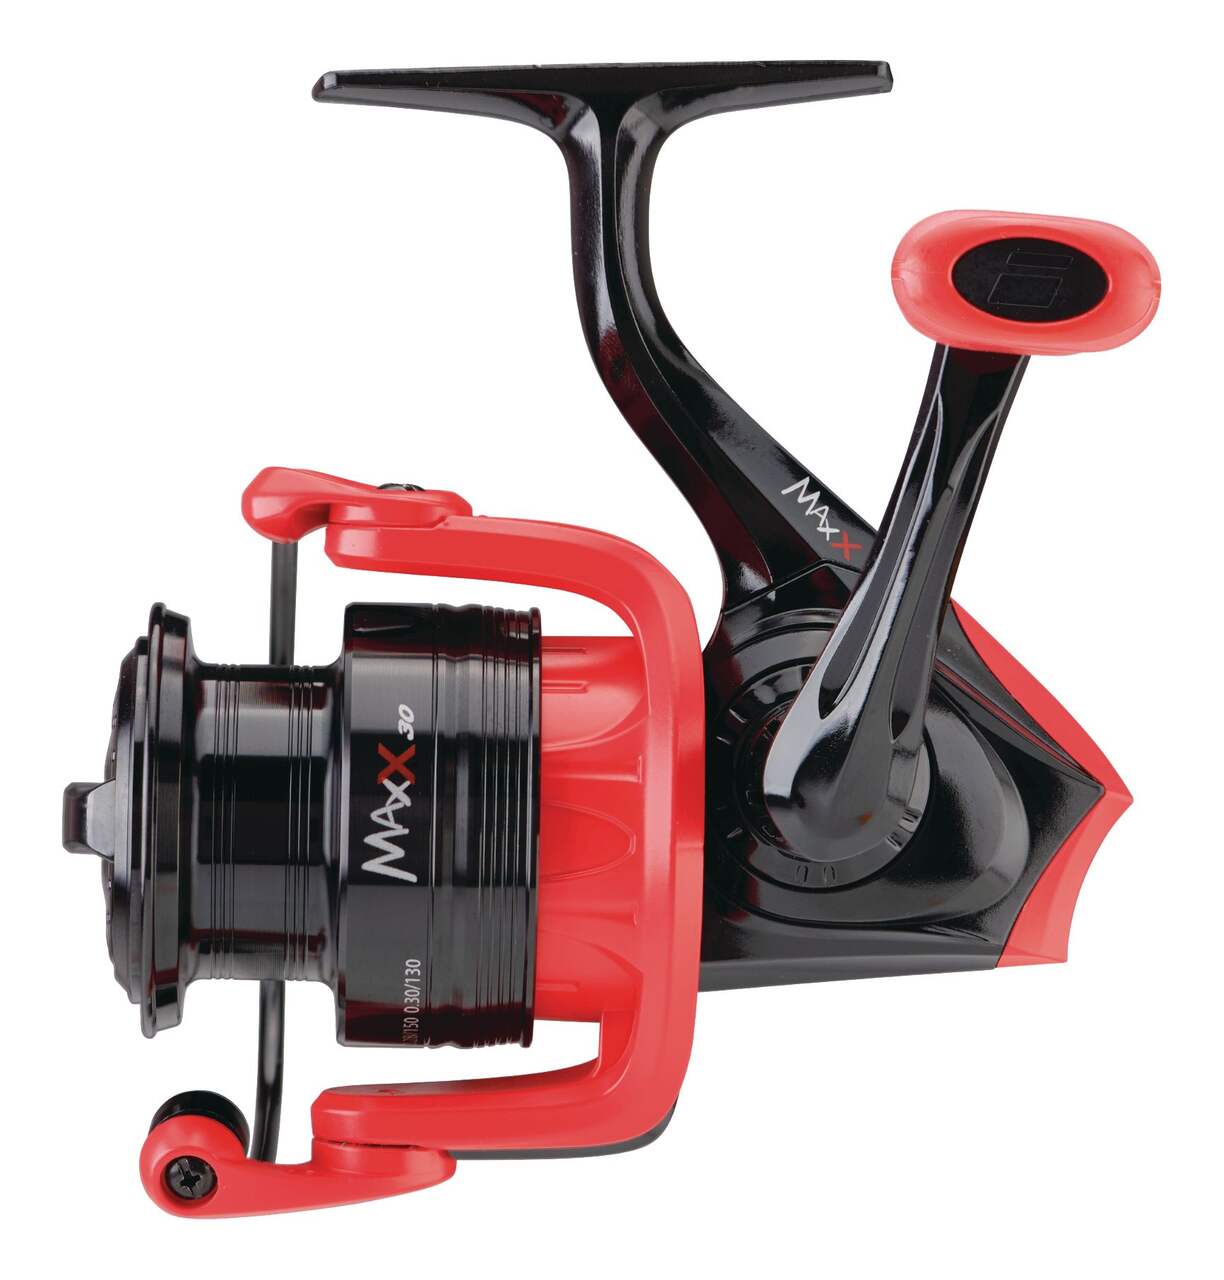 https://media-www.canadiantire.ca/product/playing/fishing/fishing-equipment/0772682/abu-garcia-max-x-spinning-reel-size-30-858c1147-872d-4048-9244-aab7a6ba0f6f-jpgrendition.jpg?imdensity=1&imwidth=1244&impolicy=mZoom